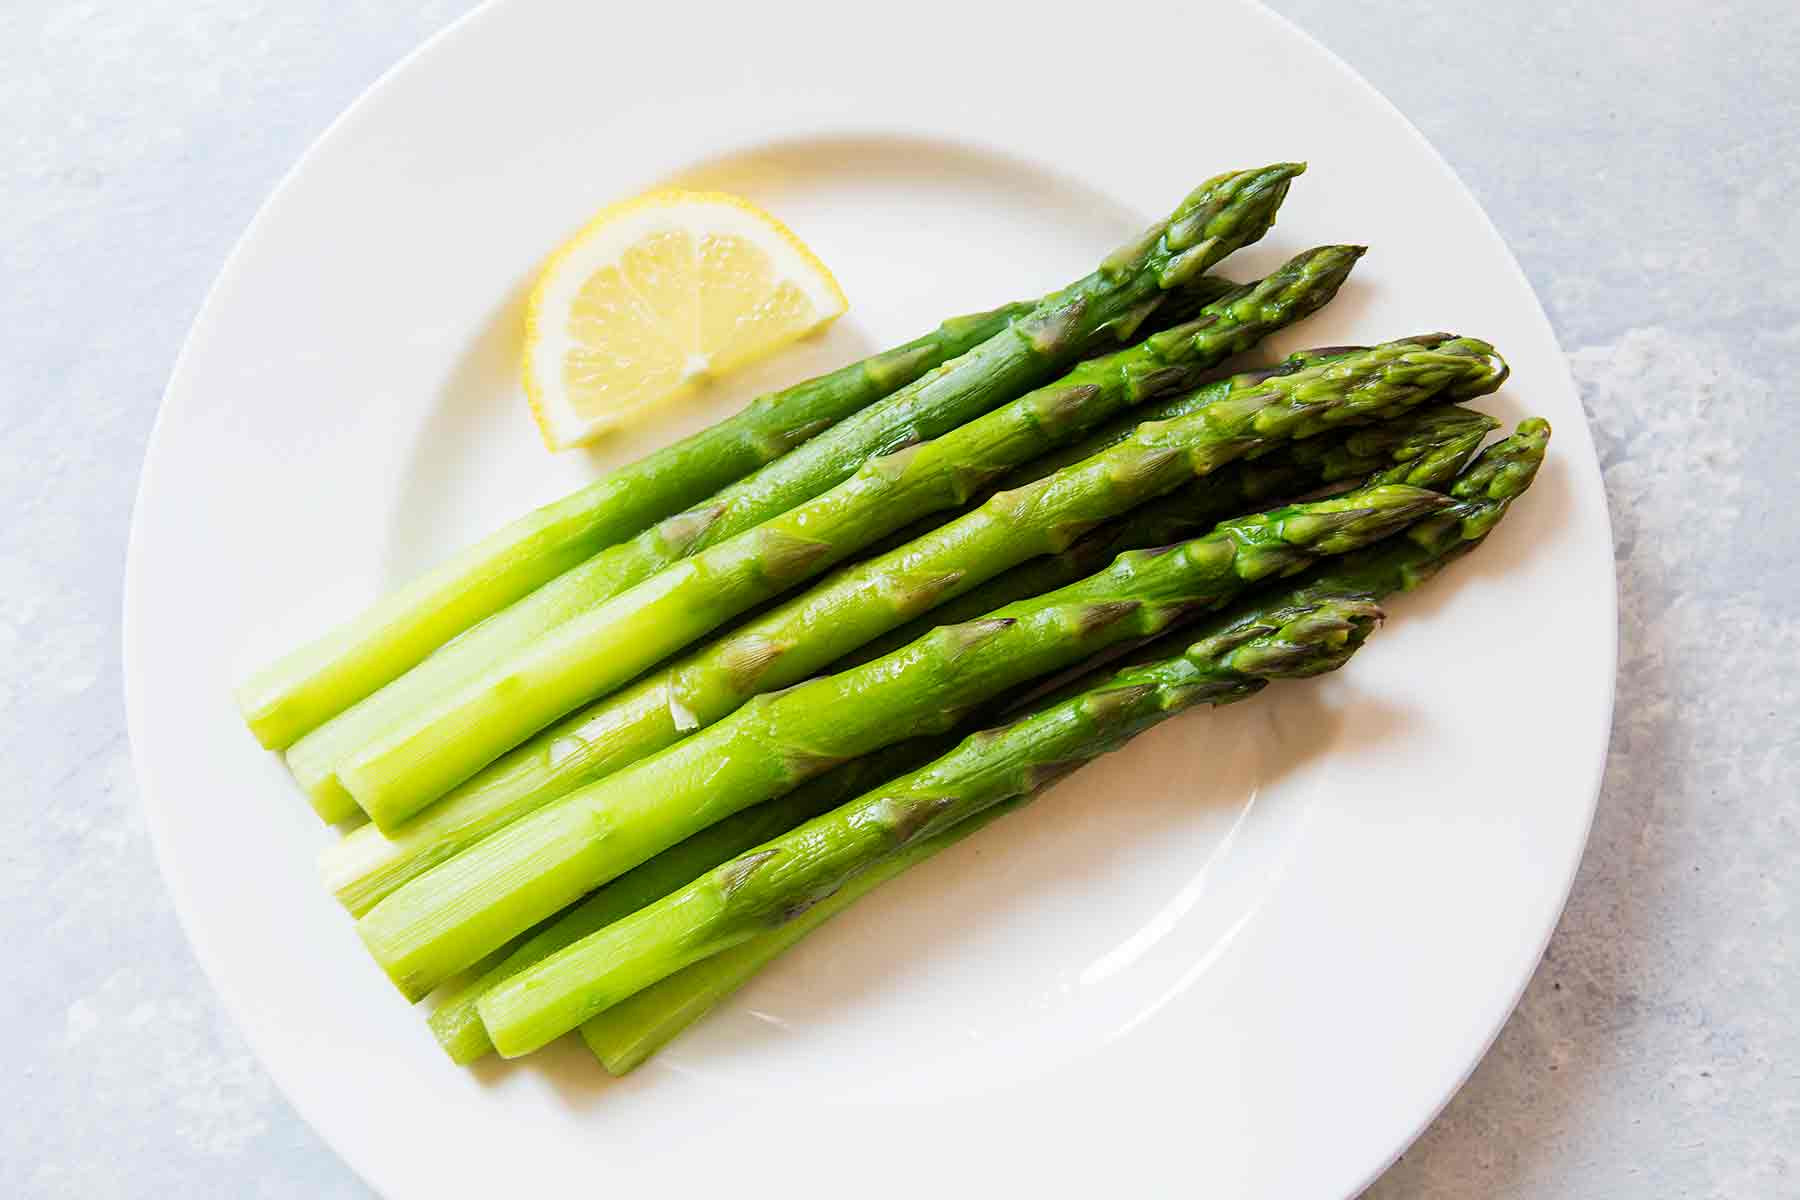 Cooking Asparagus In Microwave
 How to Cook Asparagus on the Stovetop